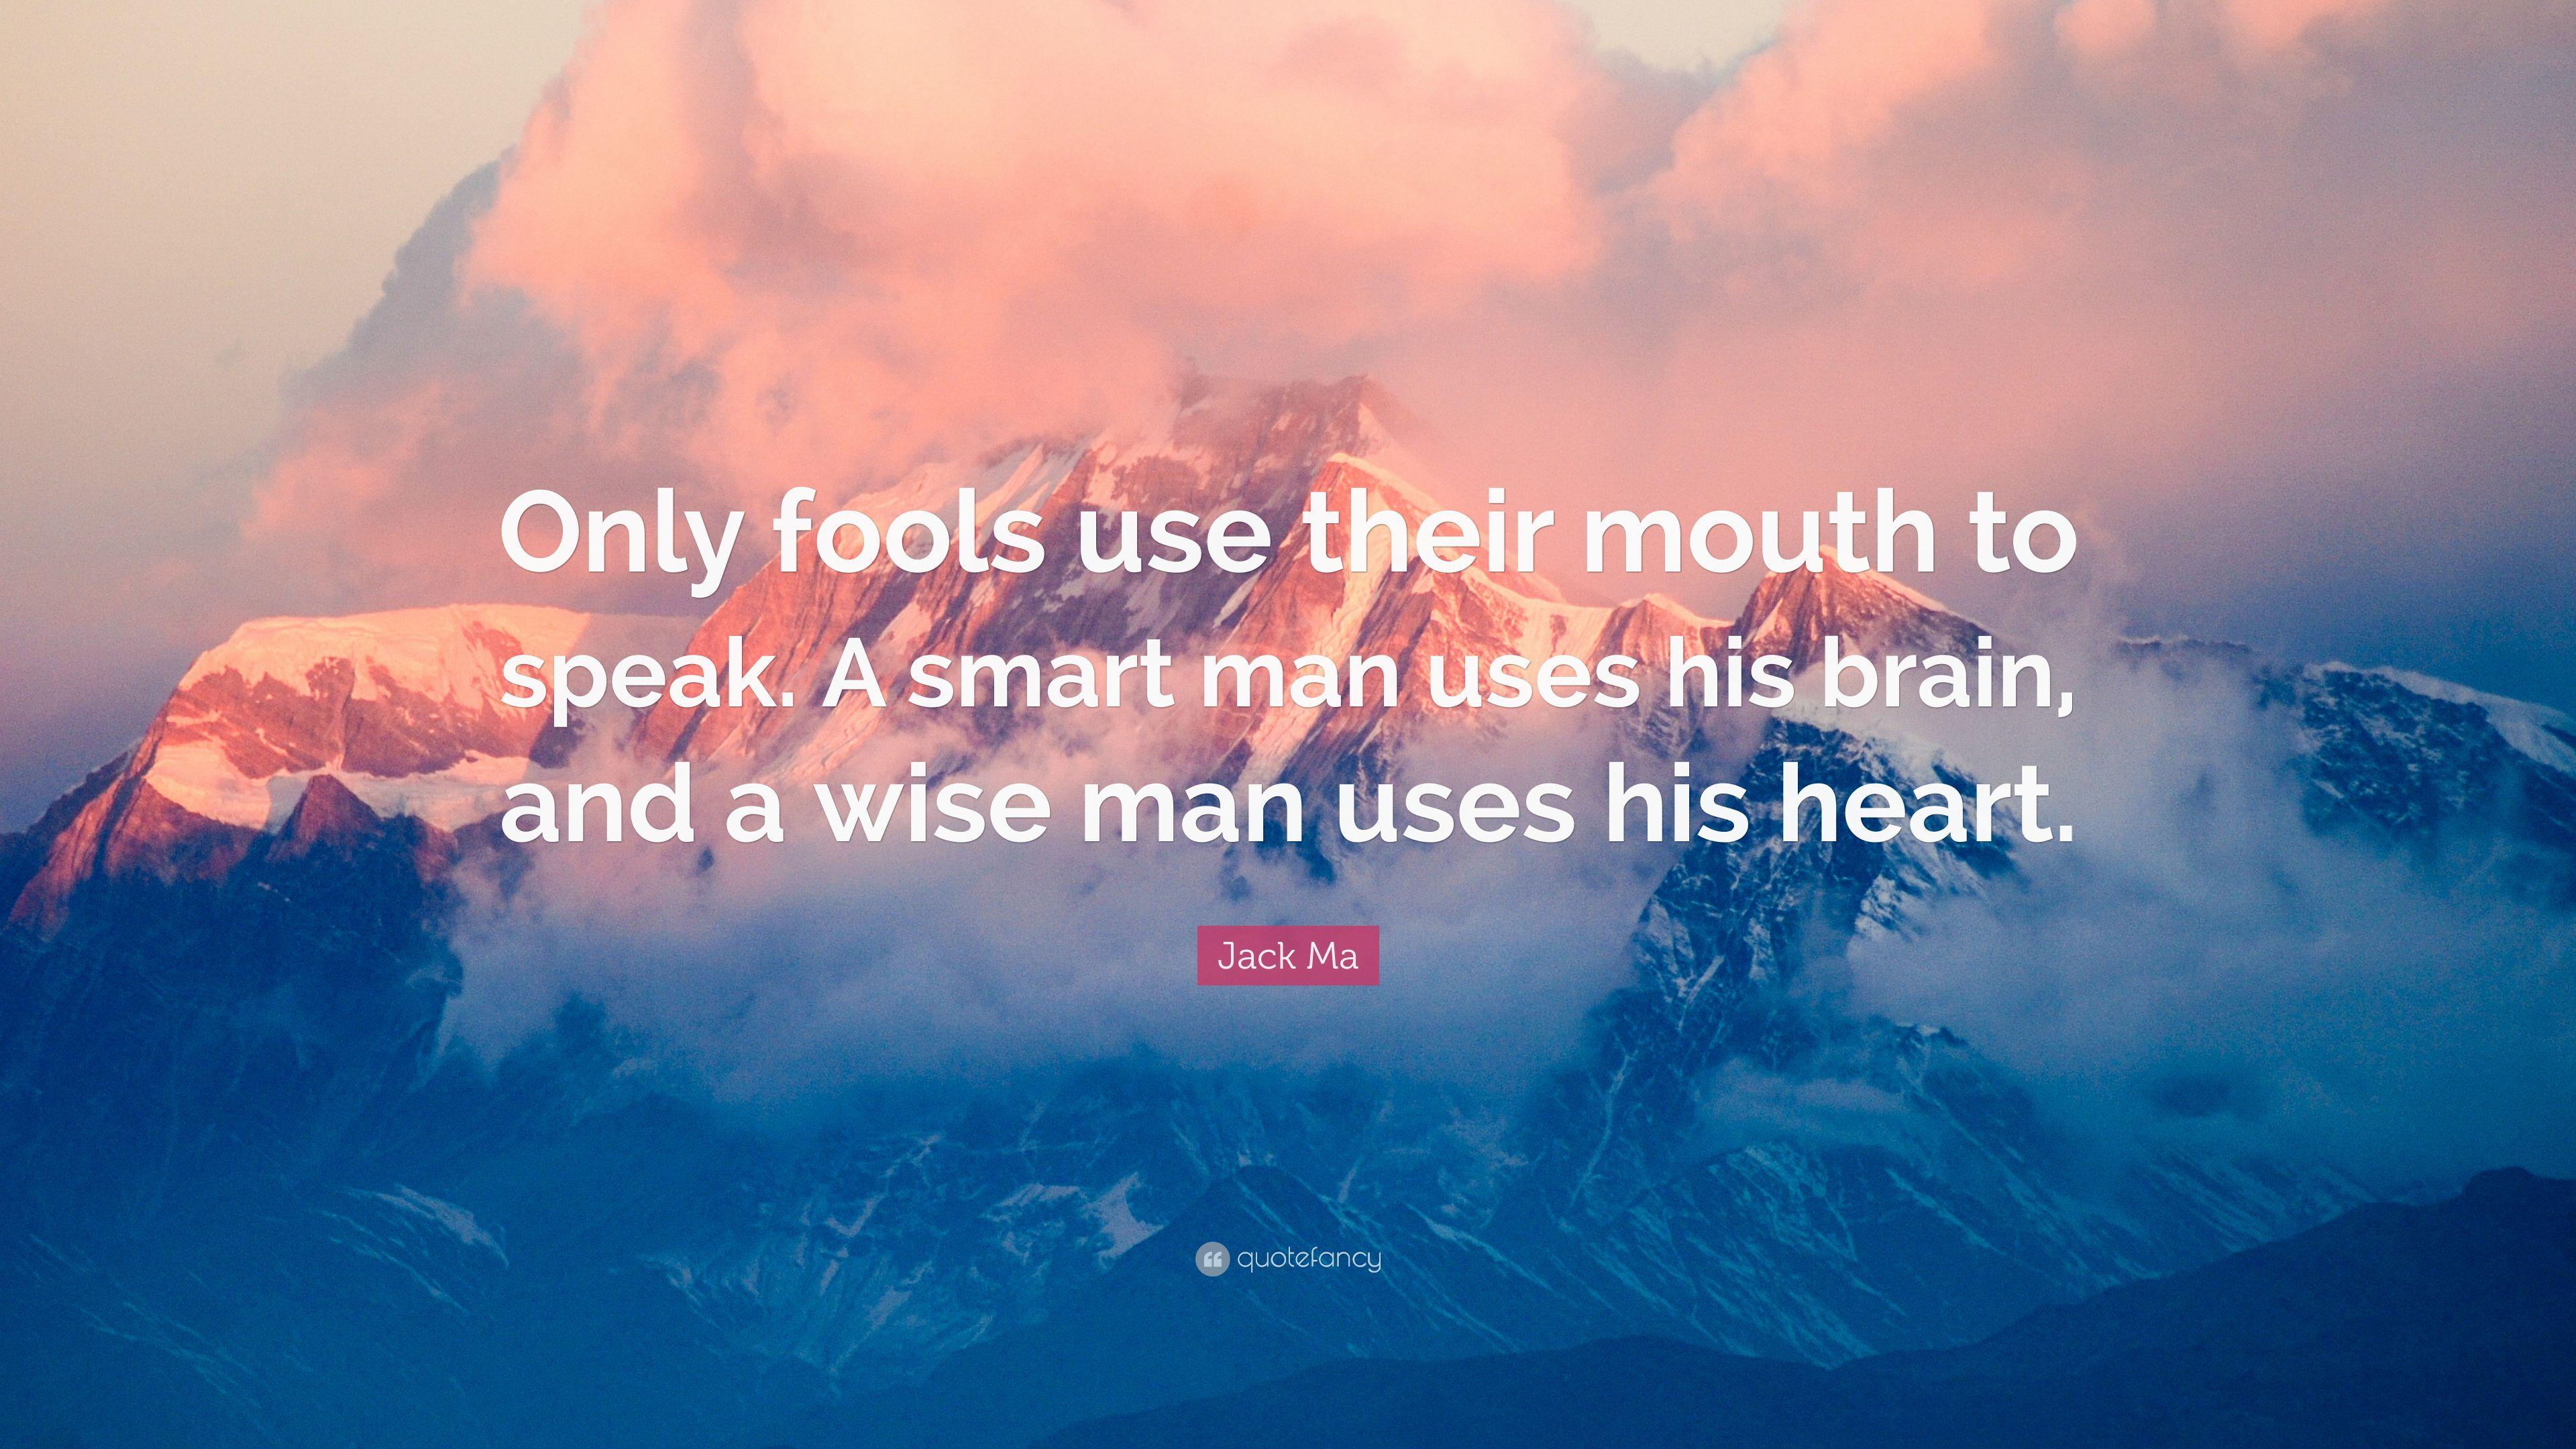 Jack Ma Quote: “Only fools use their mouth to speak. A smart man